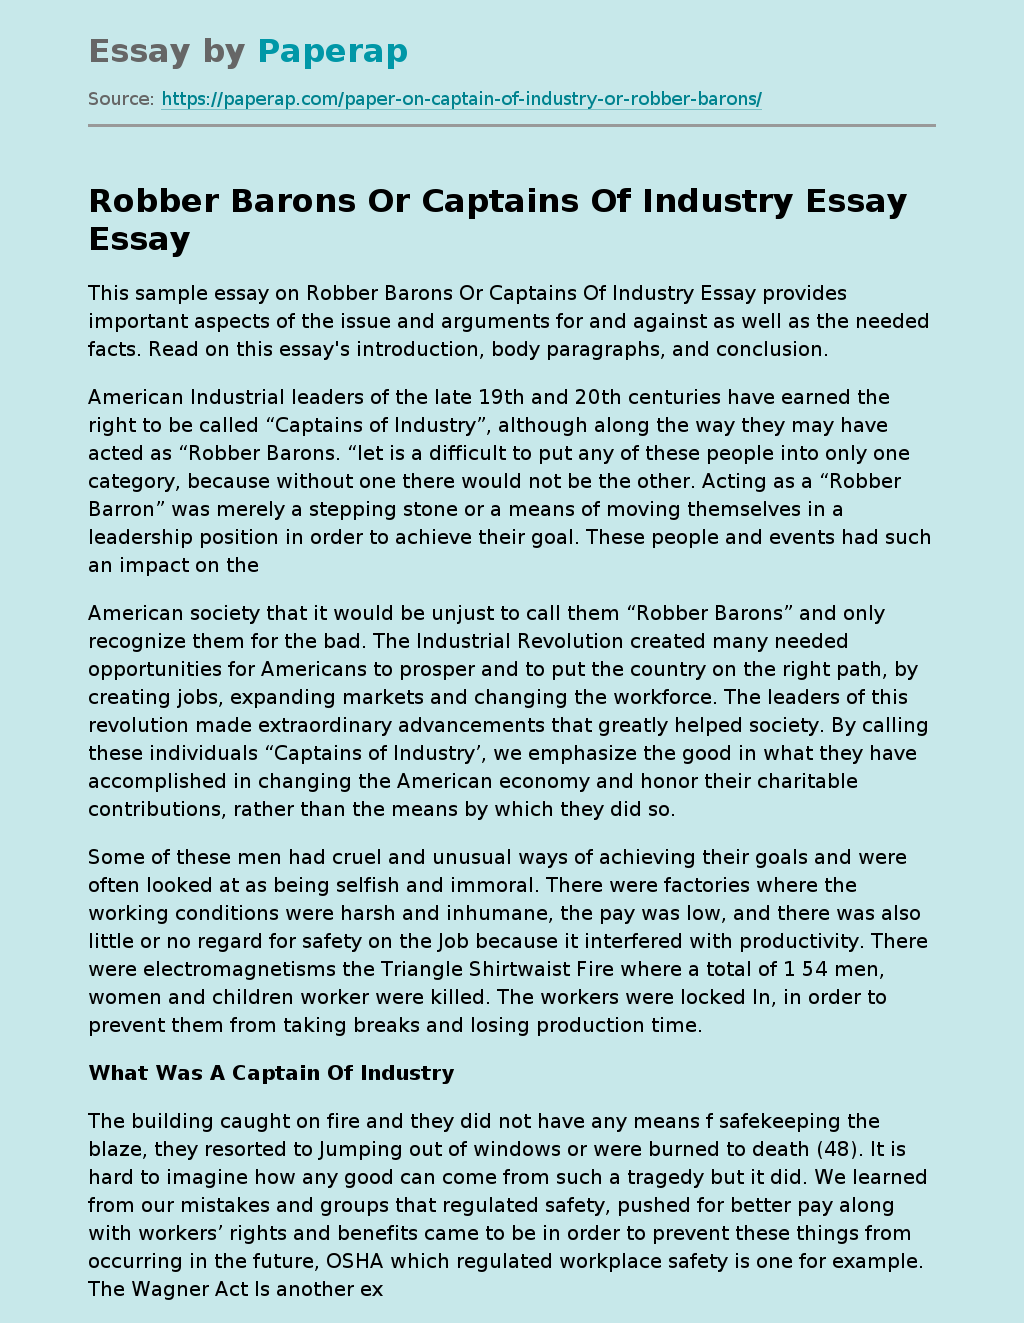 Robber Barons Or Captains Of Industry Essay